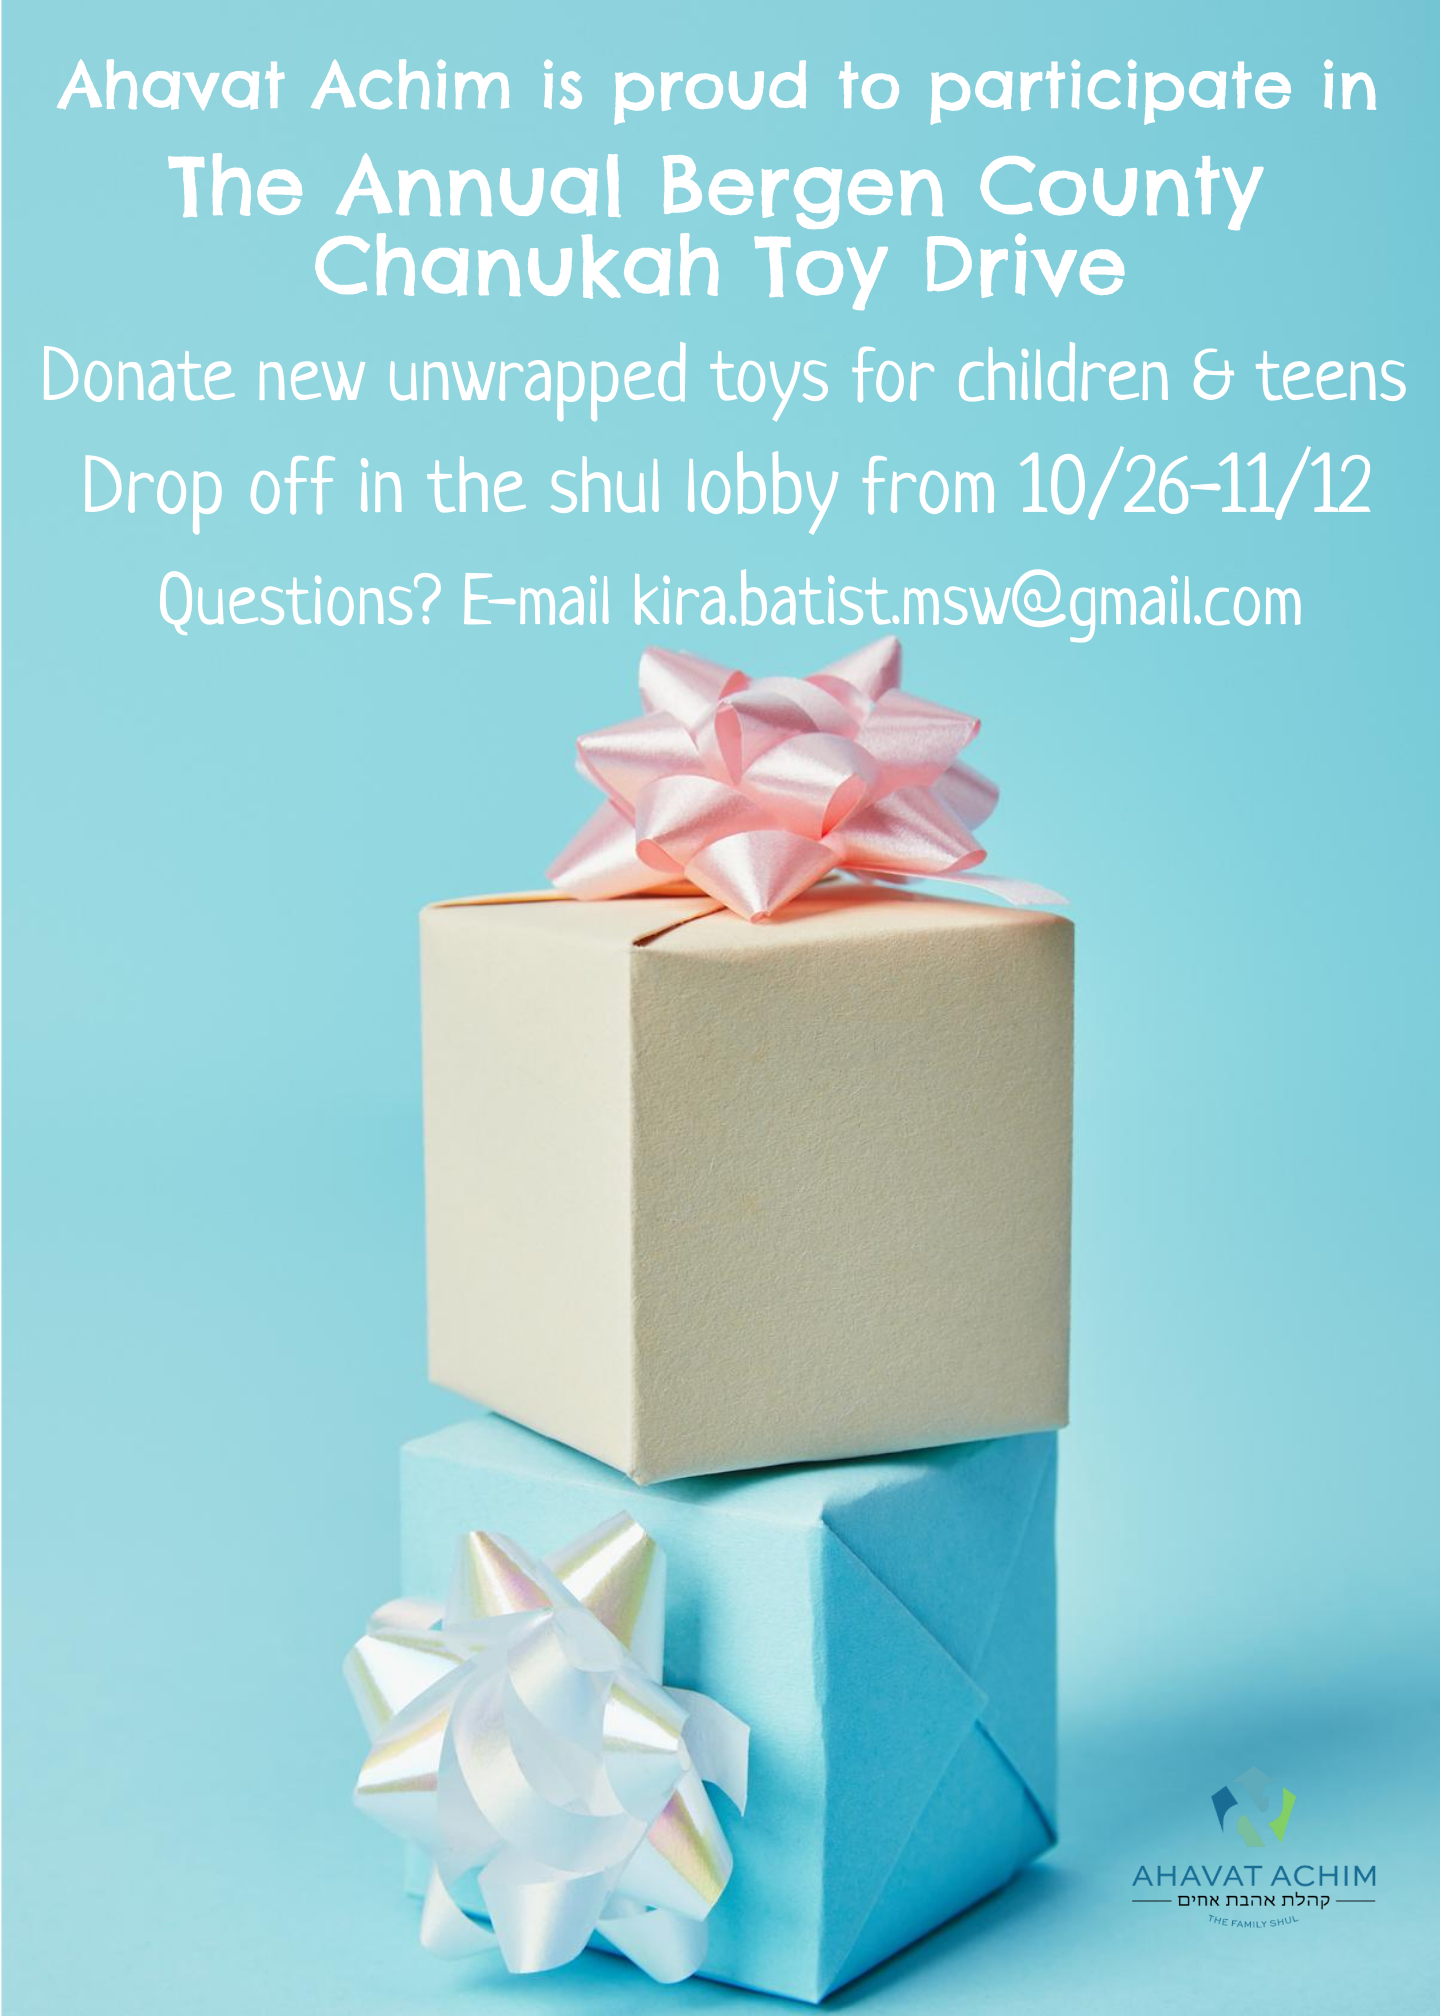 Annual Bergen County Chanukah Toy Drive